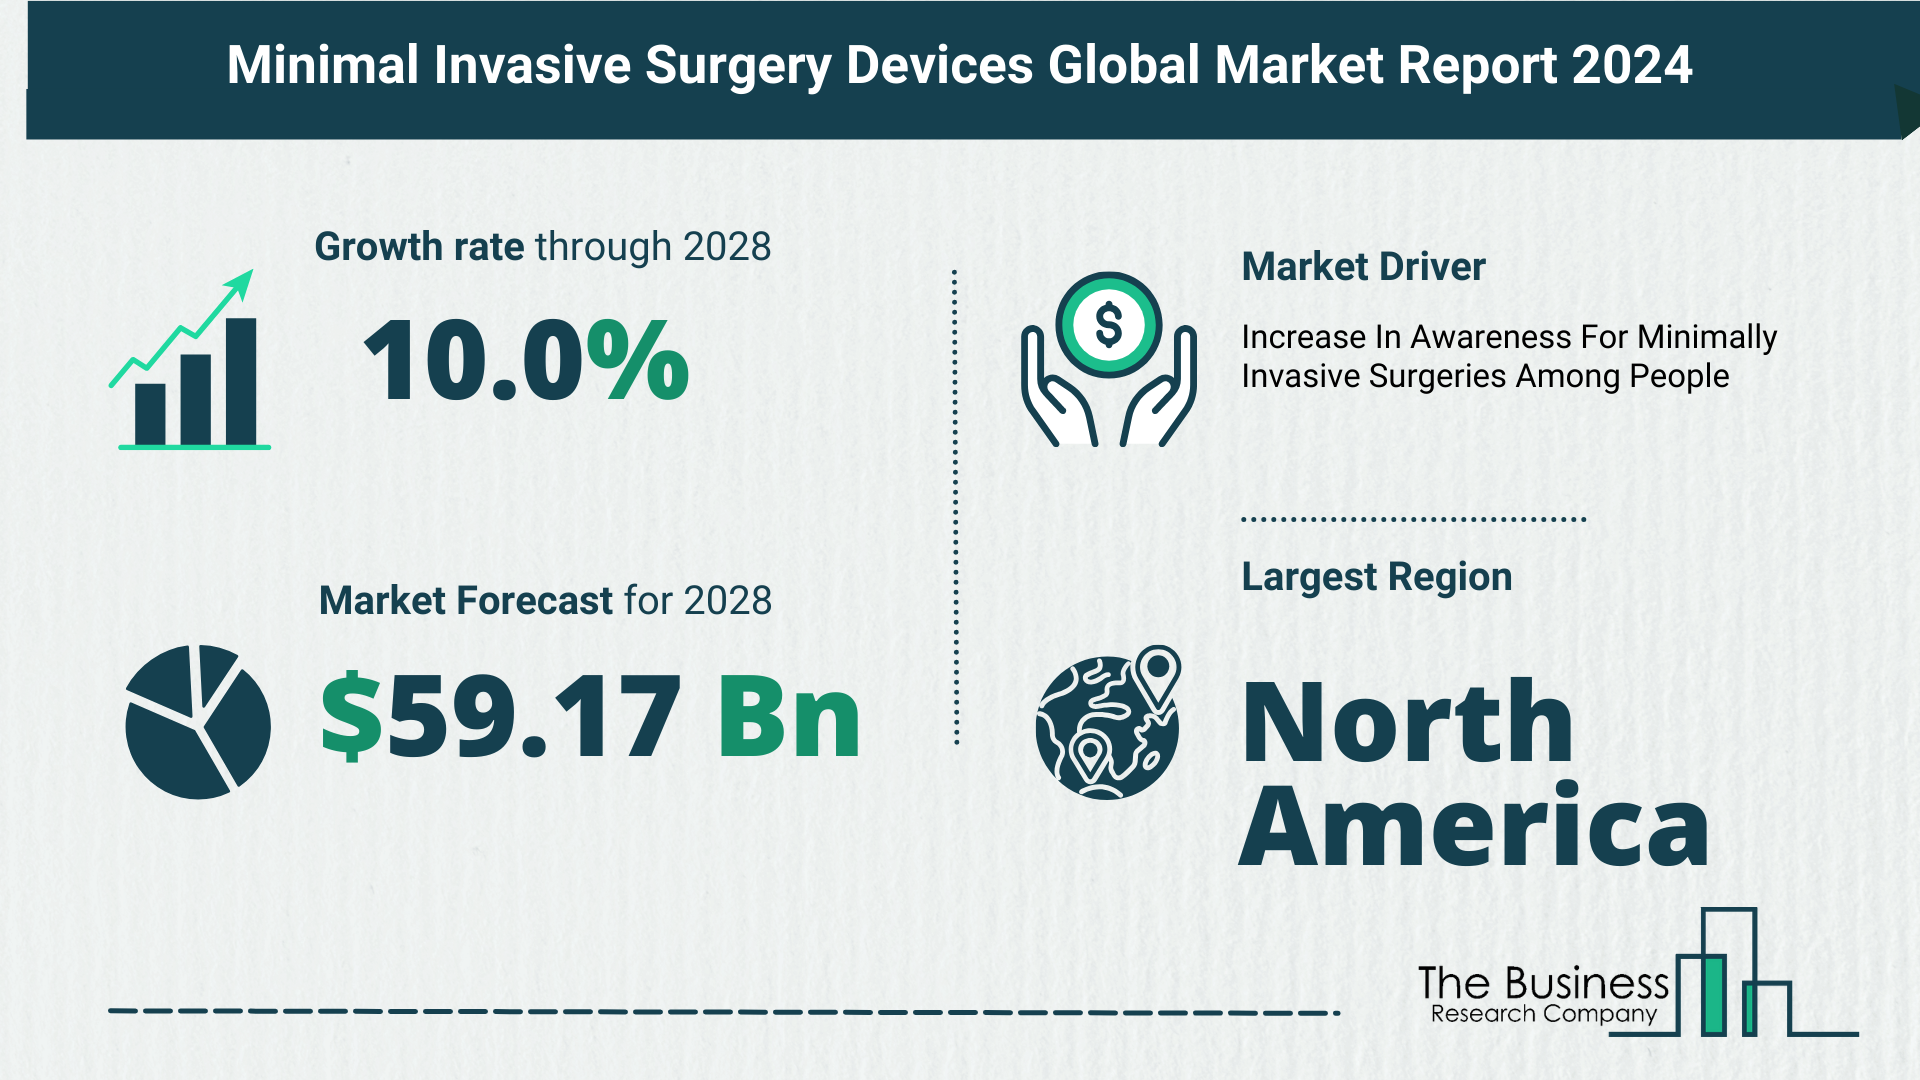 Key Takeaways From The Global Minimal Invasive Surgery Devices Market Forecast 2024